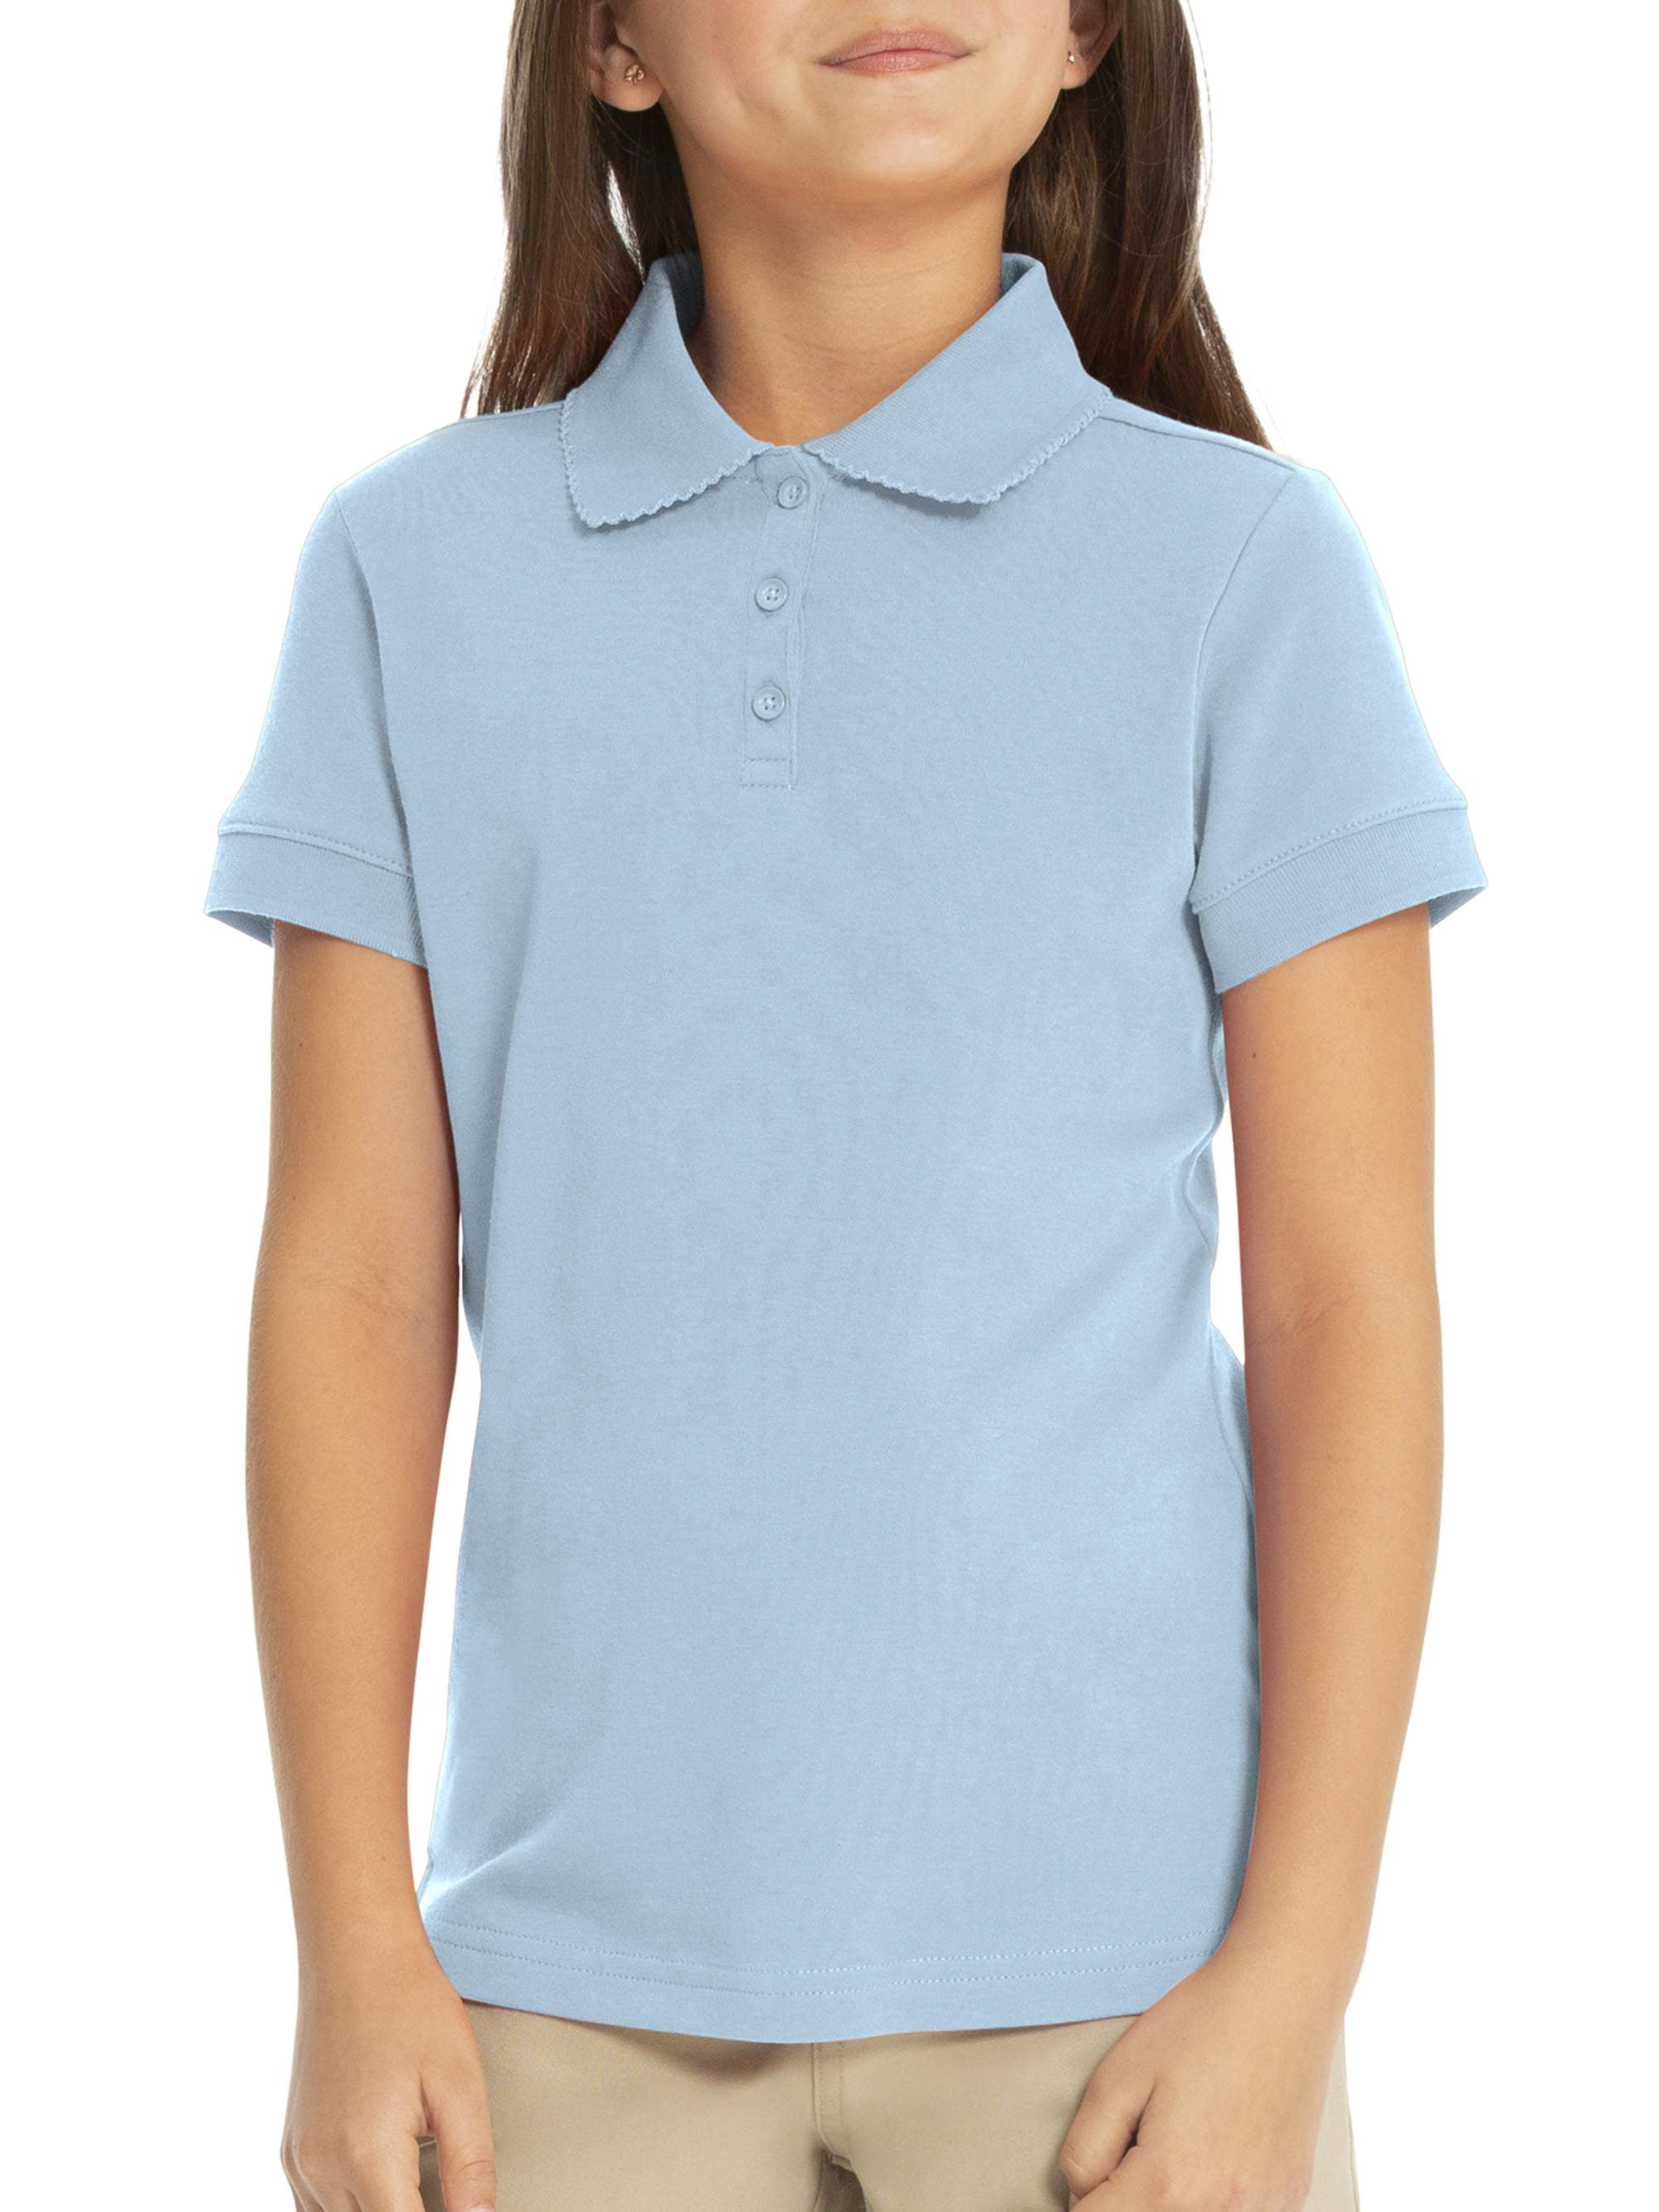 Uniform Pique Polo-Shirt for Girls in Many Colors!